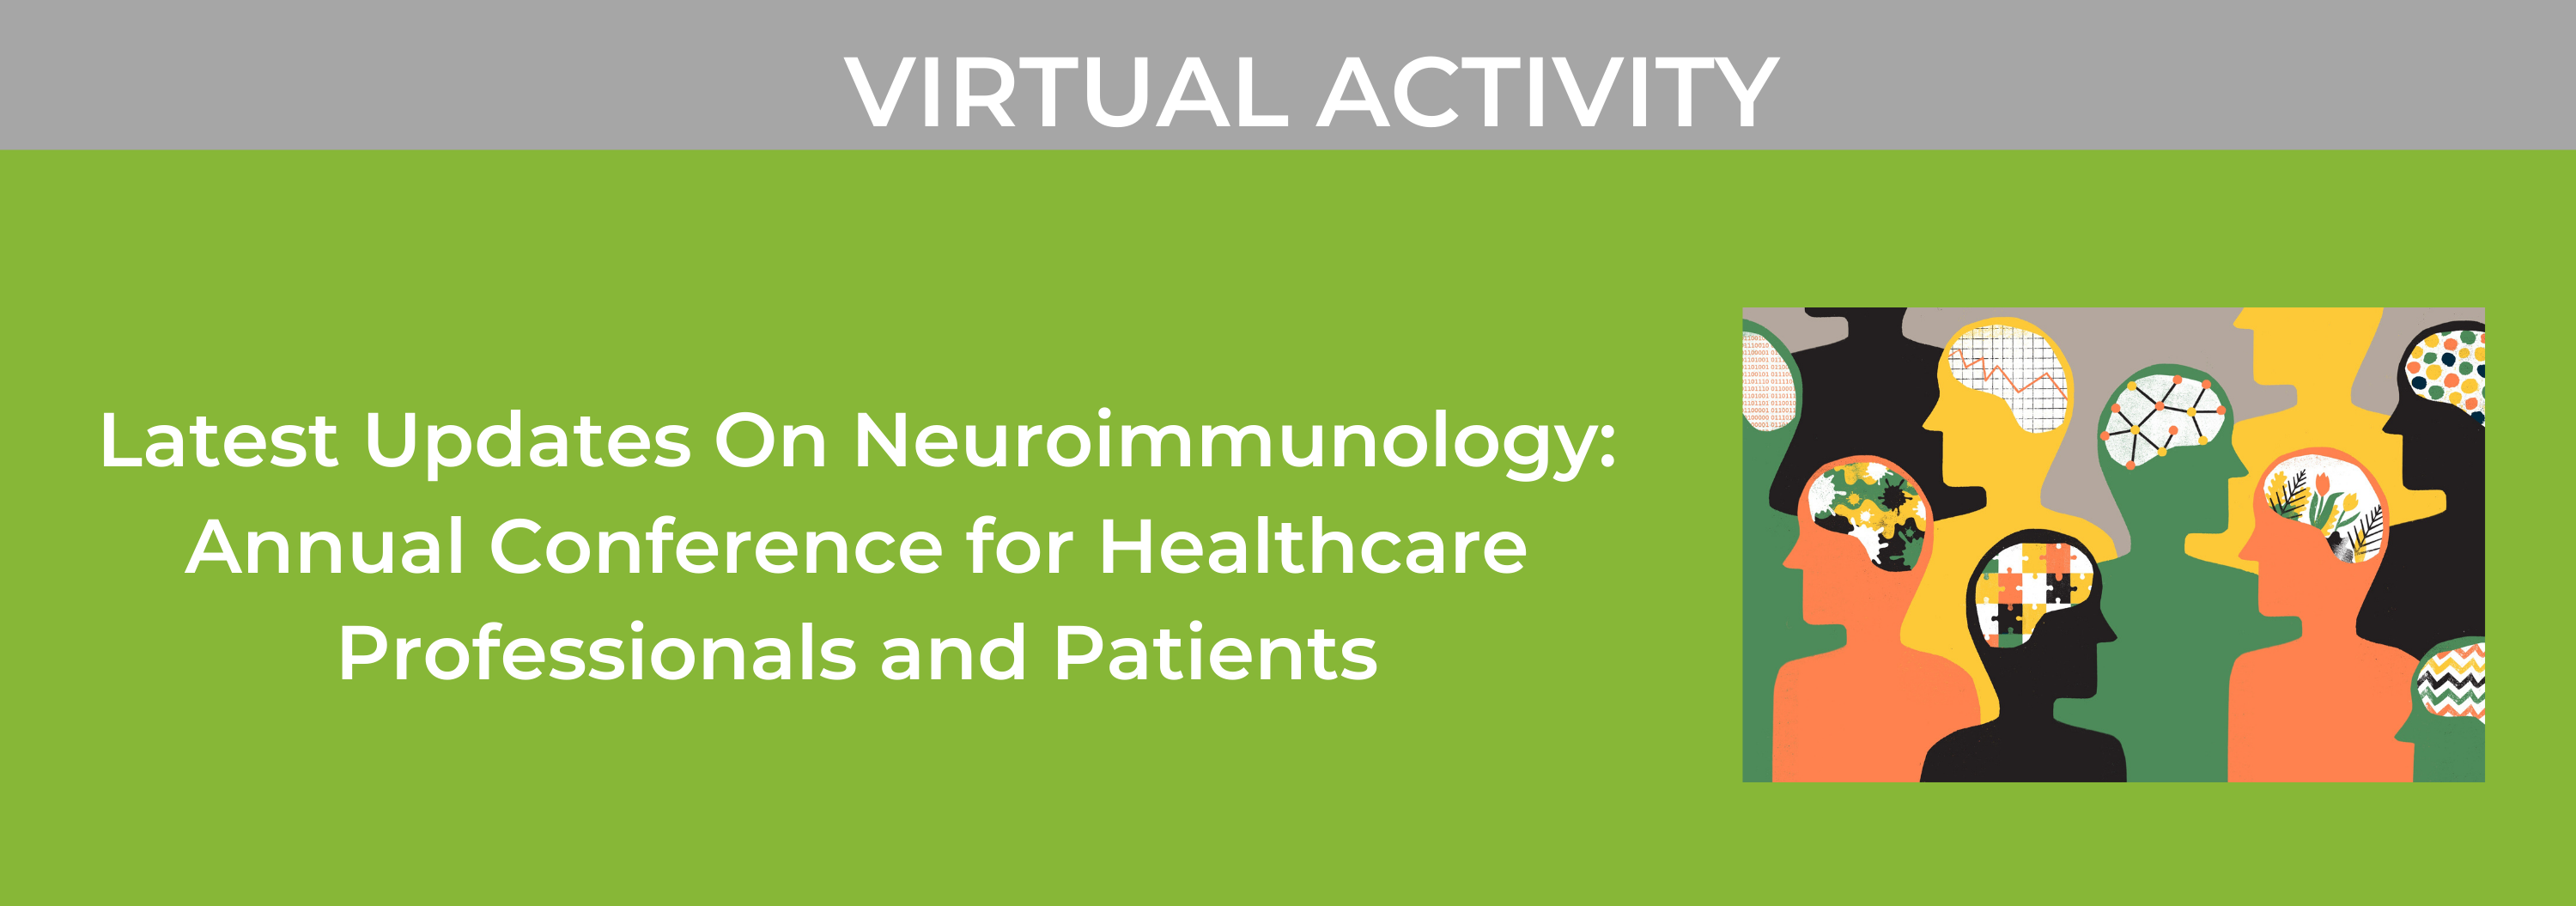 Latest Updates on Neuroimmunology: 5th Annual Conference for Healthcare Professionals and Patients Banner